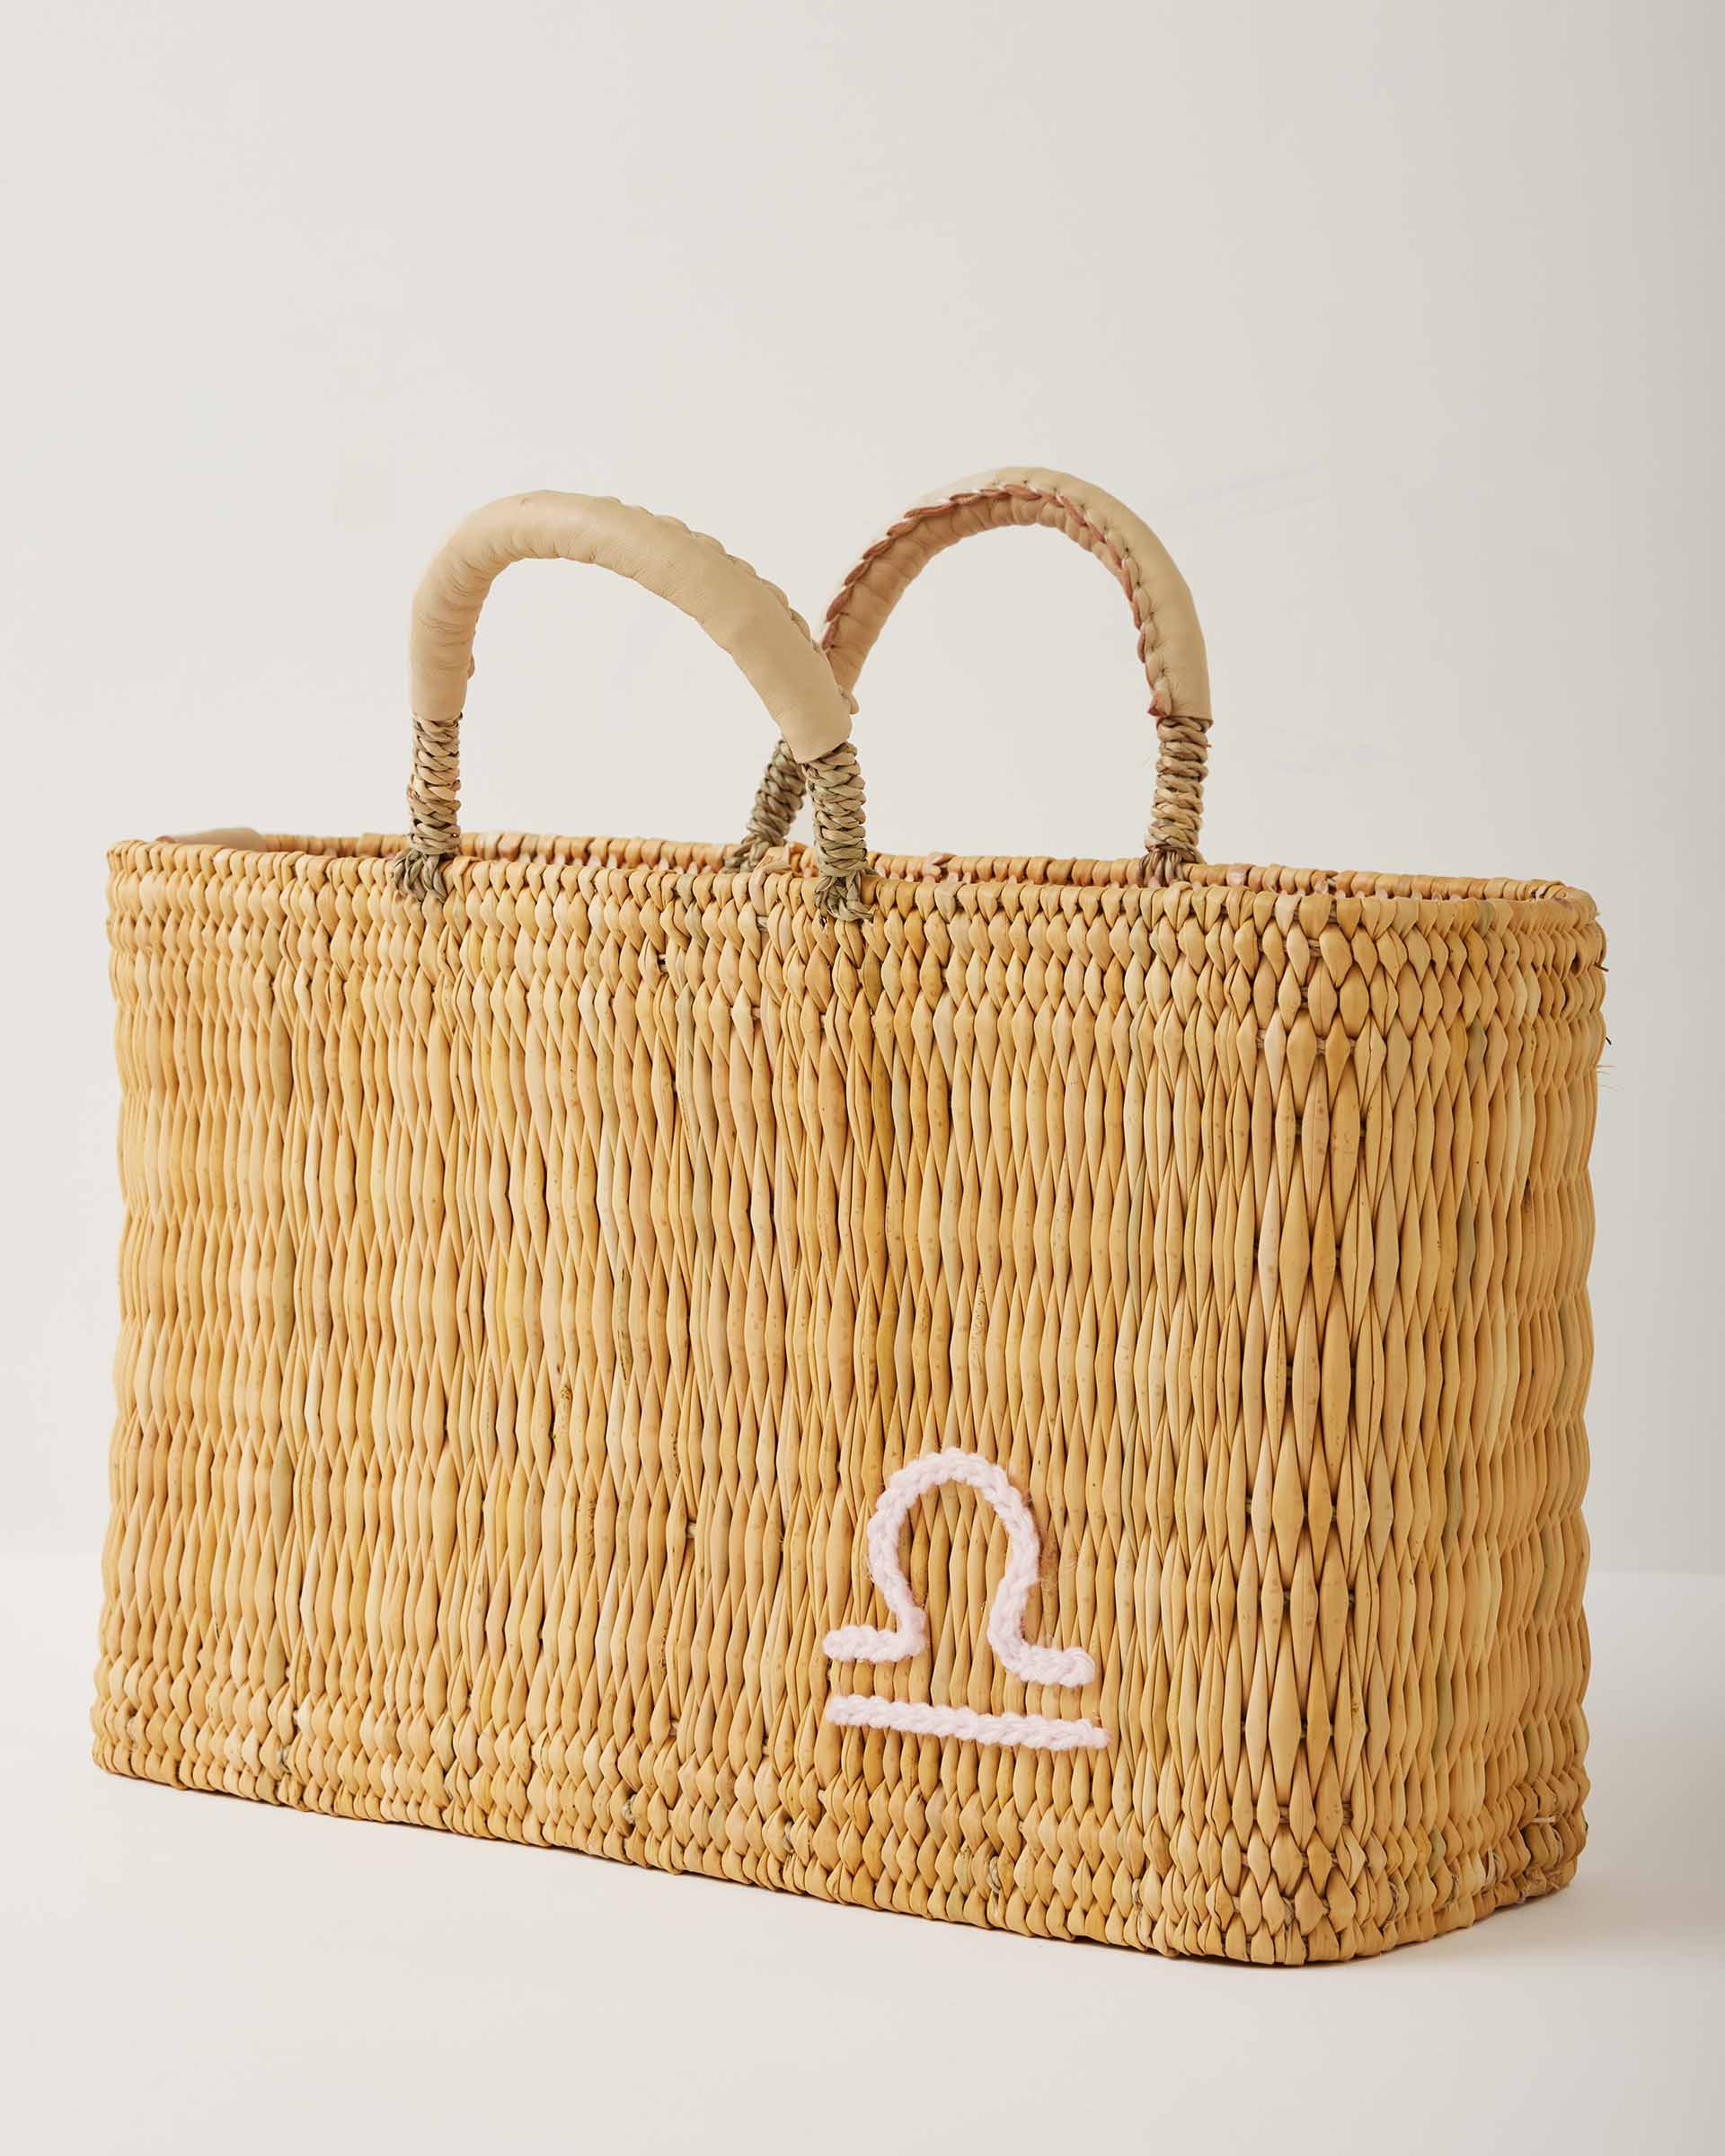 Market straw basket with tan leather handles and Libra symbol embroidered in white